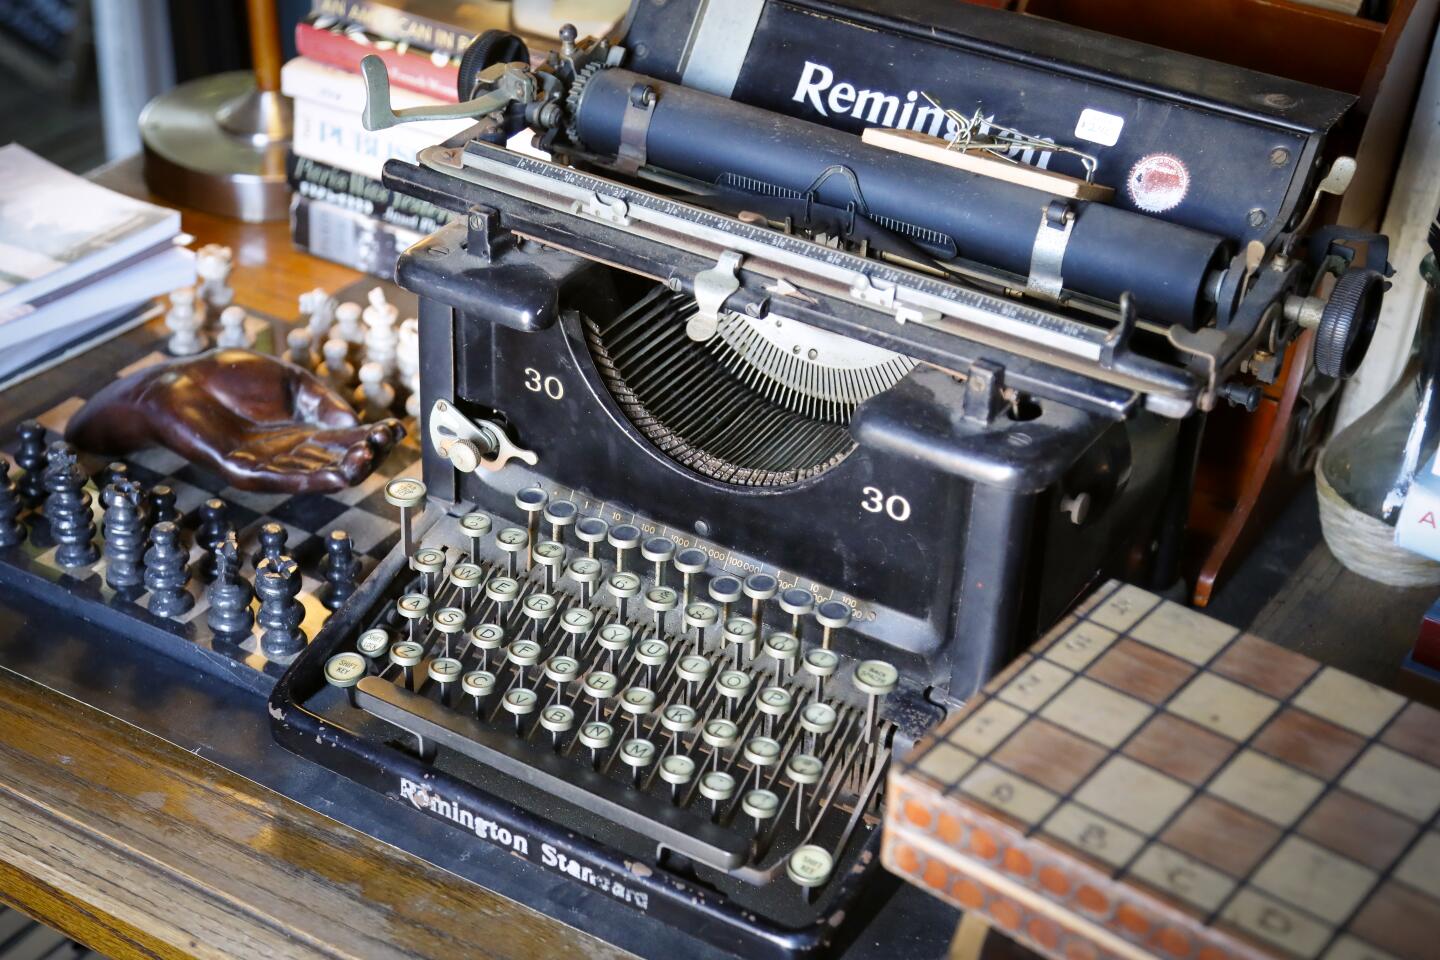 An old Remington typewriter is one of the many items at Lhooq Books, a funky vintage bookstore in Carlsbad Village. Sean Christopher, the owner recently received a 60-day eviction notice for both the shop and the adjoining house where he has raised his son, alone. He's hoping to achieve a stay of eviction on the property long enough to sell off his book inventory and find a new space without going bankrupt and ending up homeless with his son.